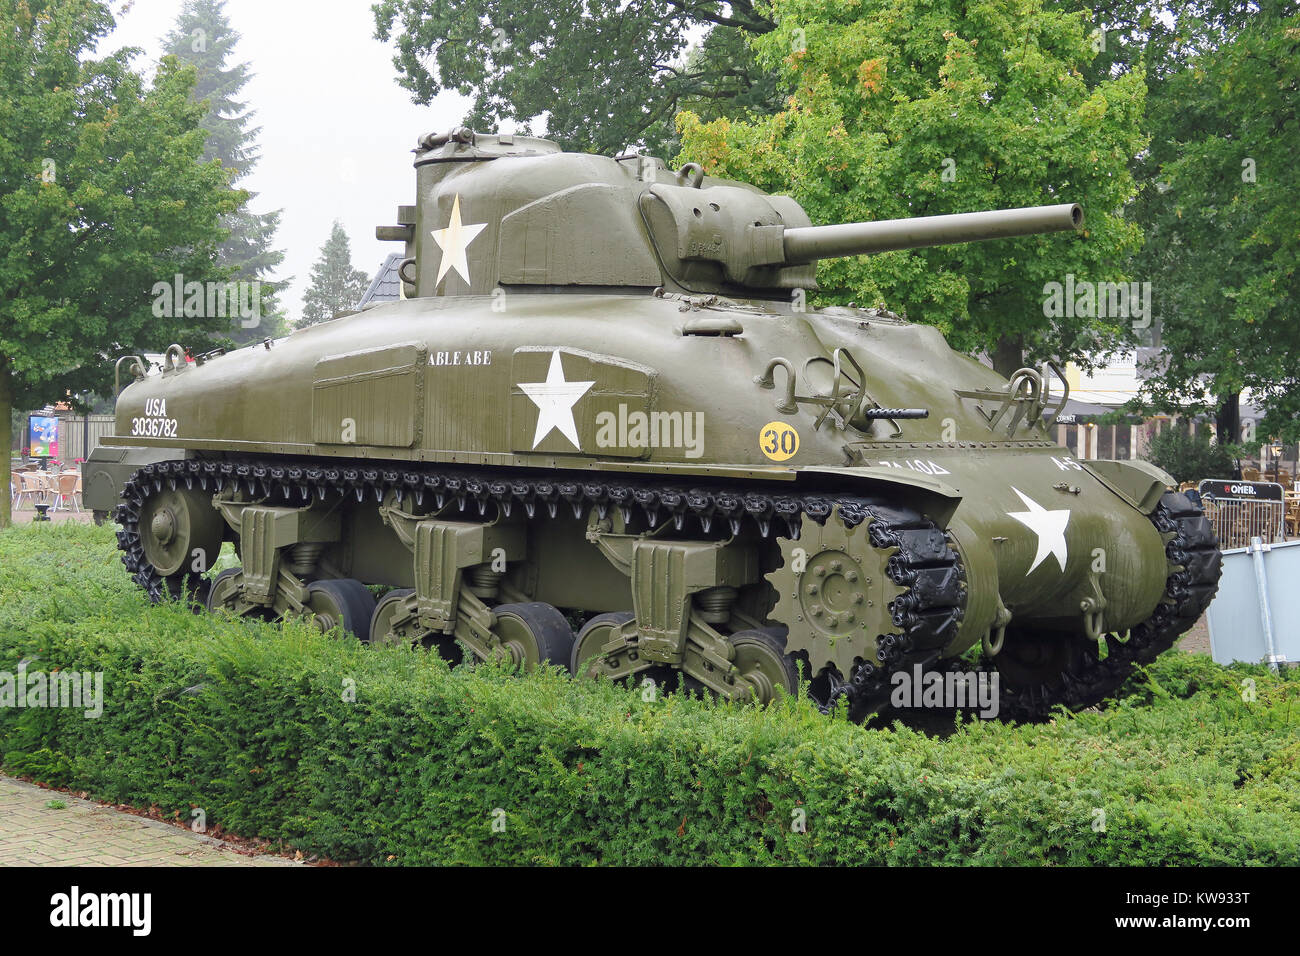 M4 Sherman tank preserved and displayed outside the National War Museum, Overloon, Netherlands Stock Photo